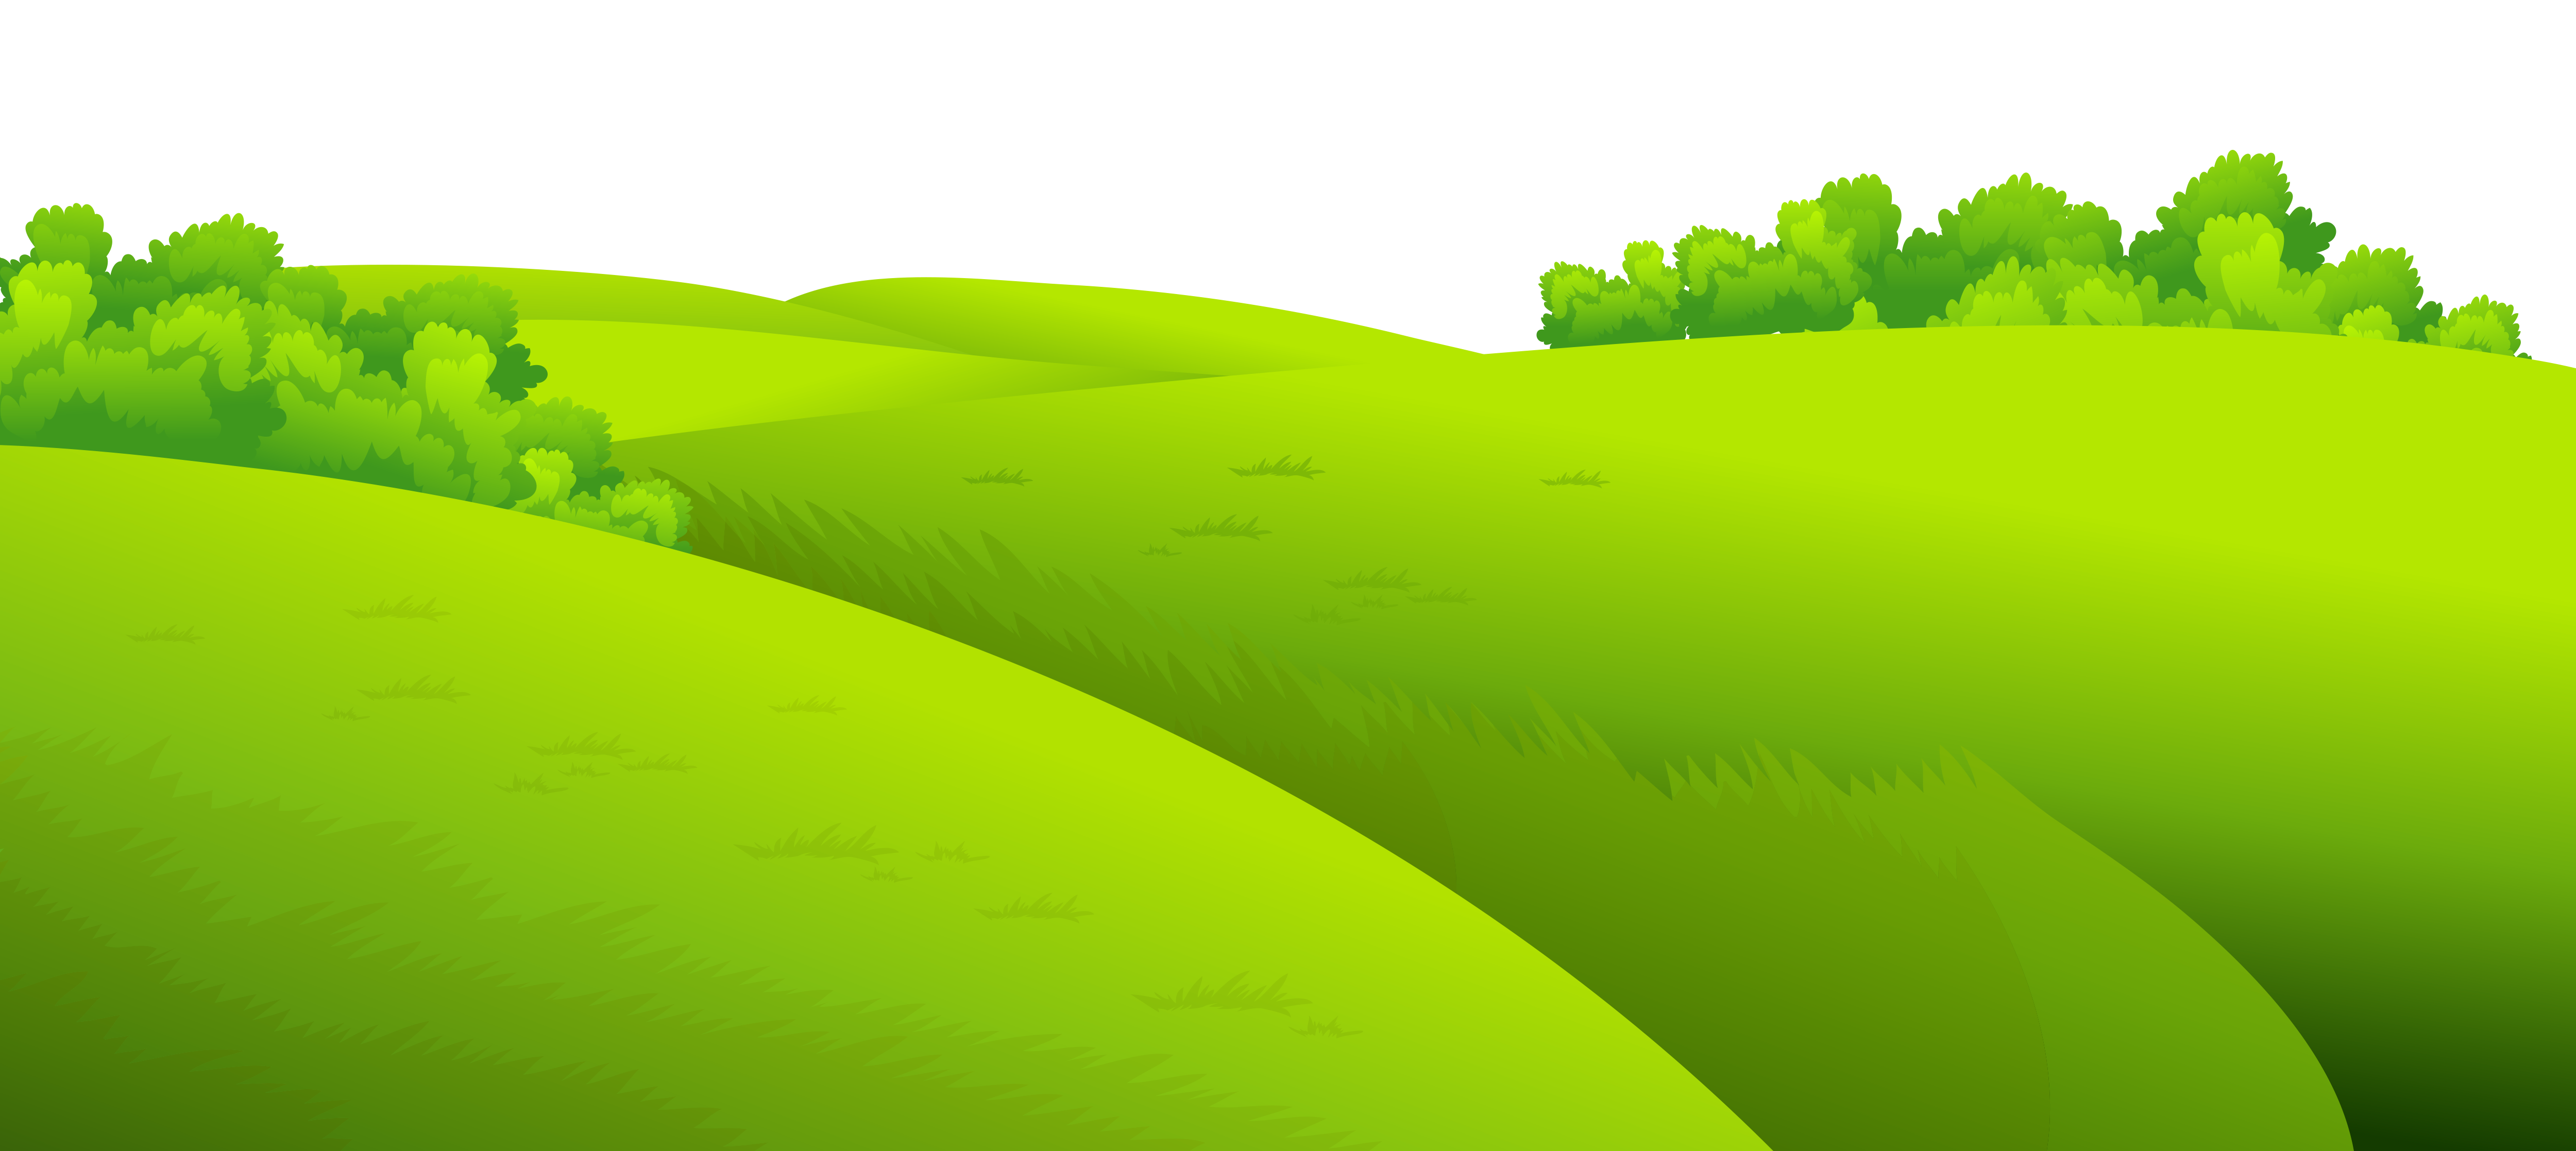 Grass clipart blue background. Green ground png clip